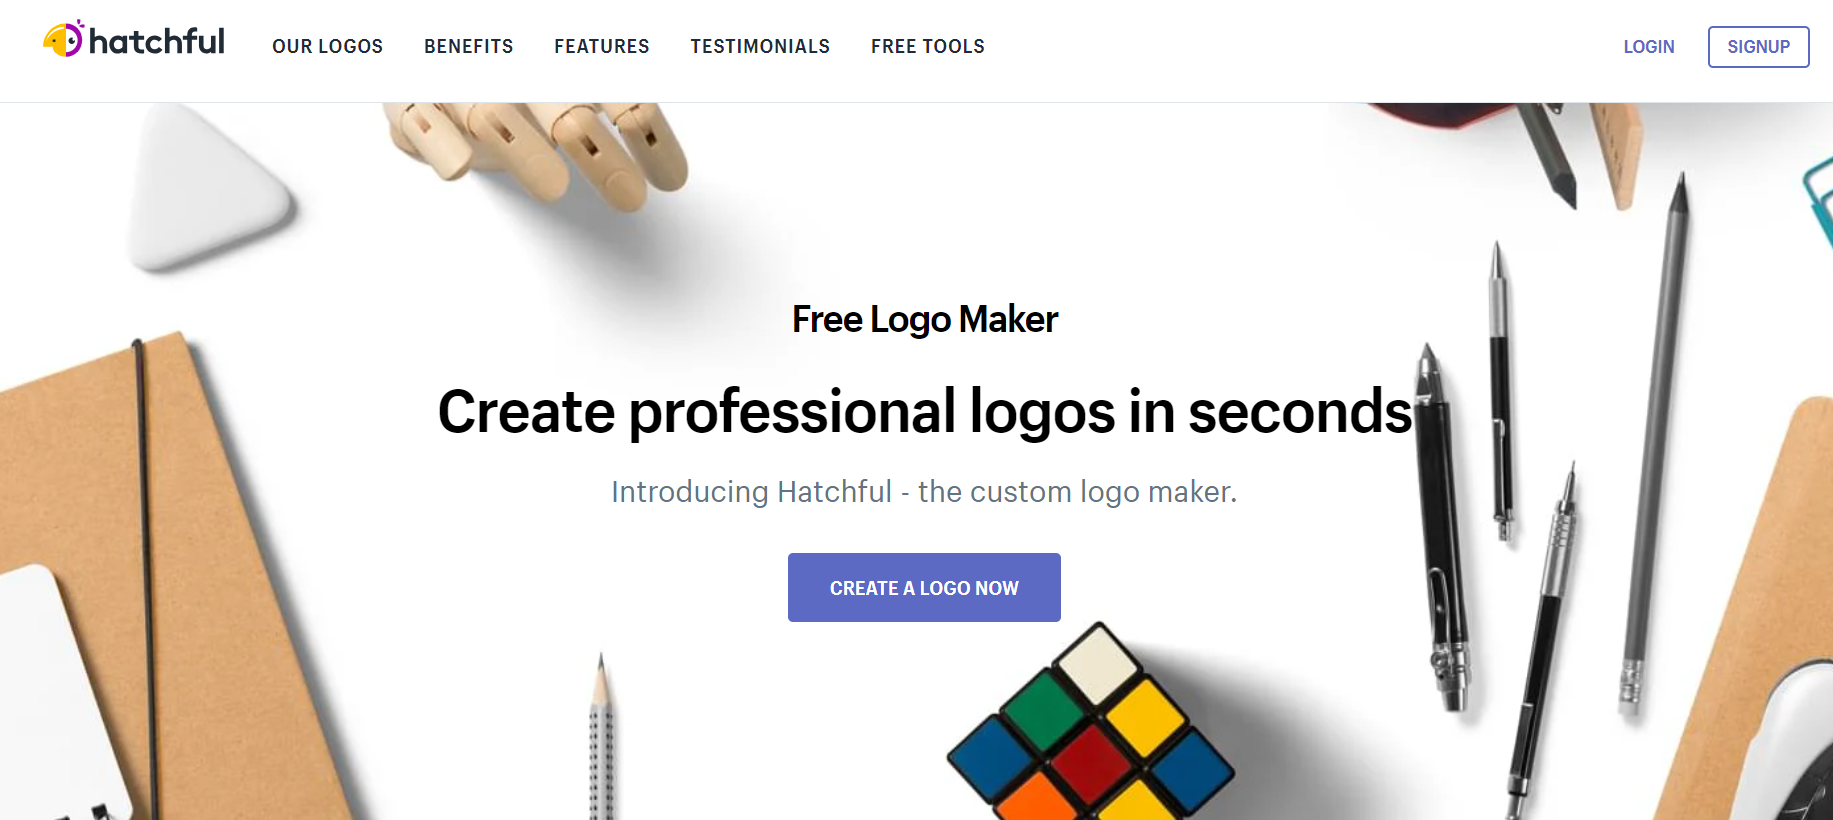 hatchful It allows you to easily design professional logos for your store. You can choose from hundreds of templates, customize your logo with different fonts, colors, and icons, and download high-resolution files ready to use on your website and social media.